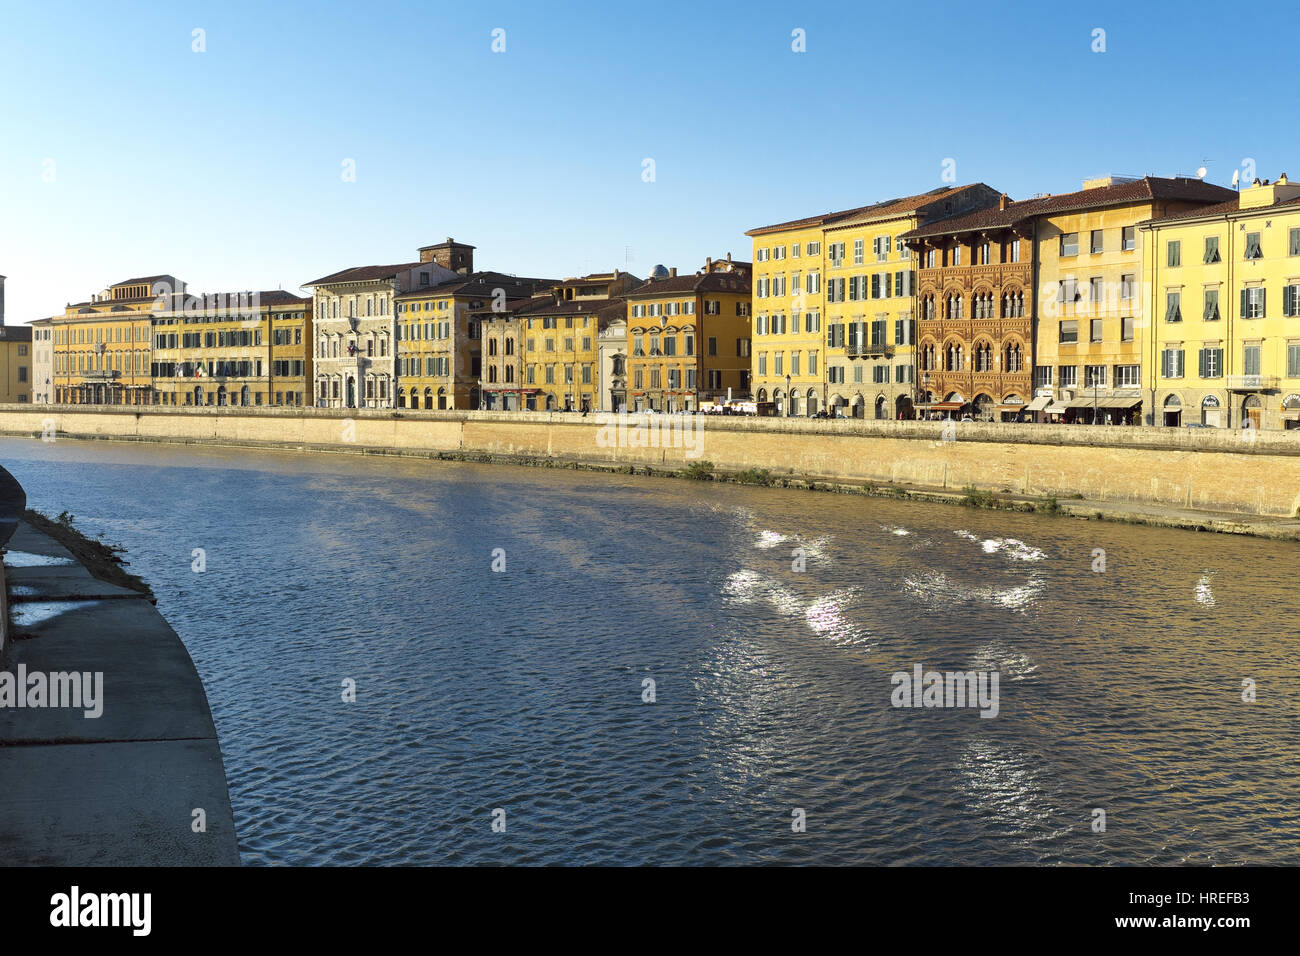 Urban landscape at golden hour before sunset - Arno river bend view from Ponte di Mezzo, Pisa, Tuscany, Italy, Europe - Beautiful warm natural light Stock Photo